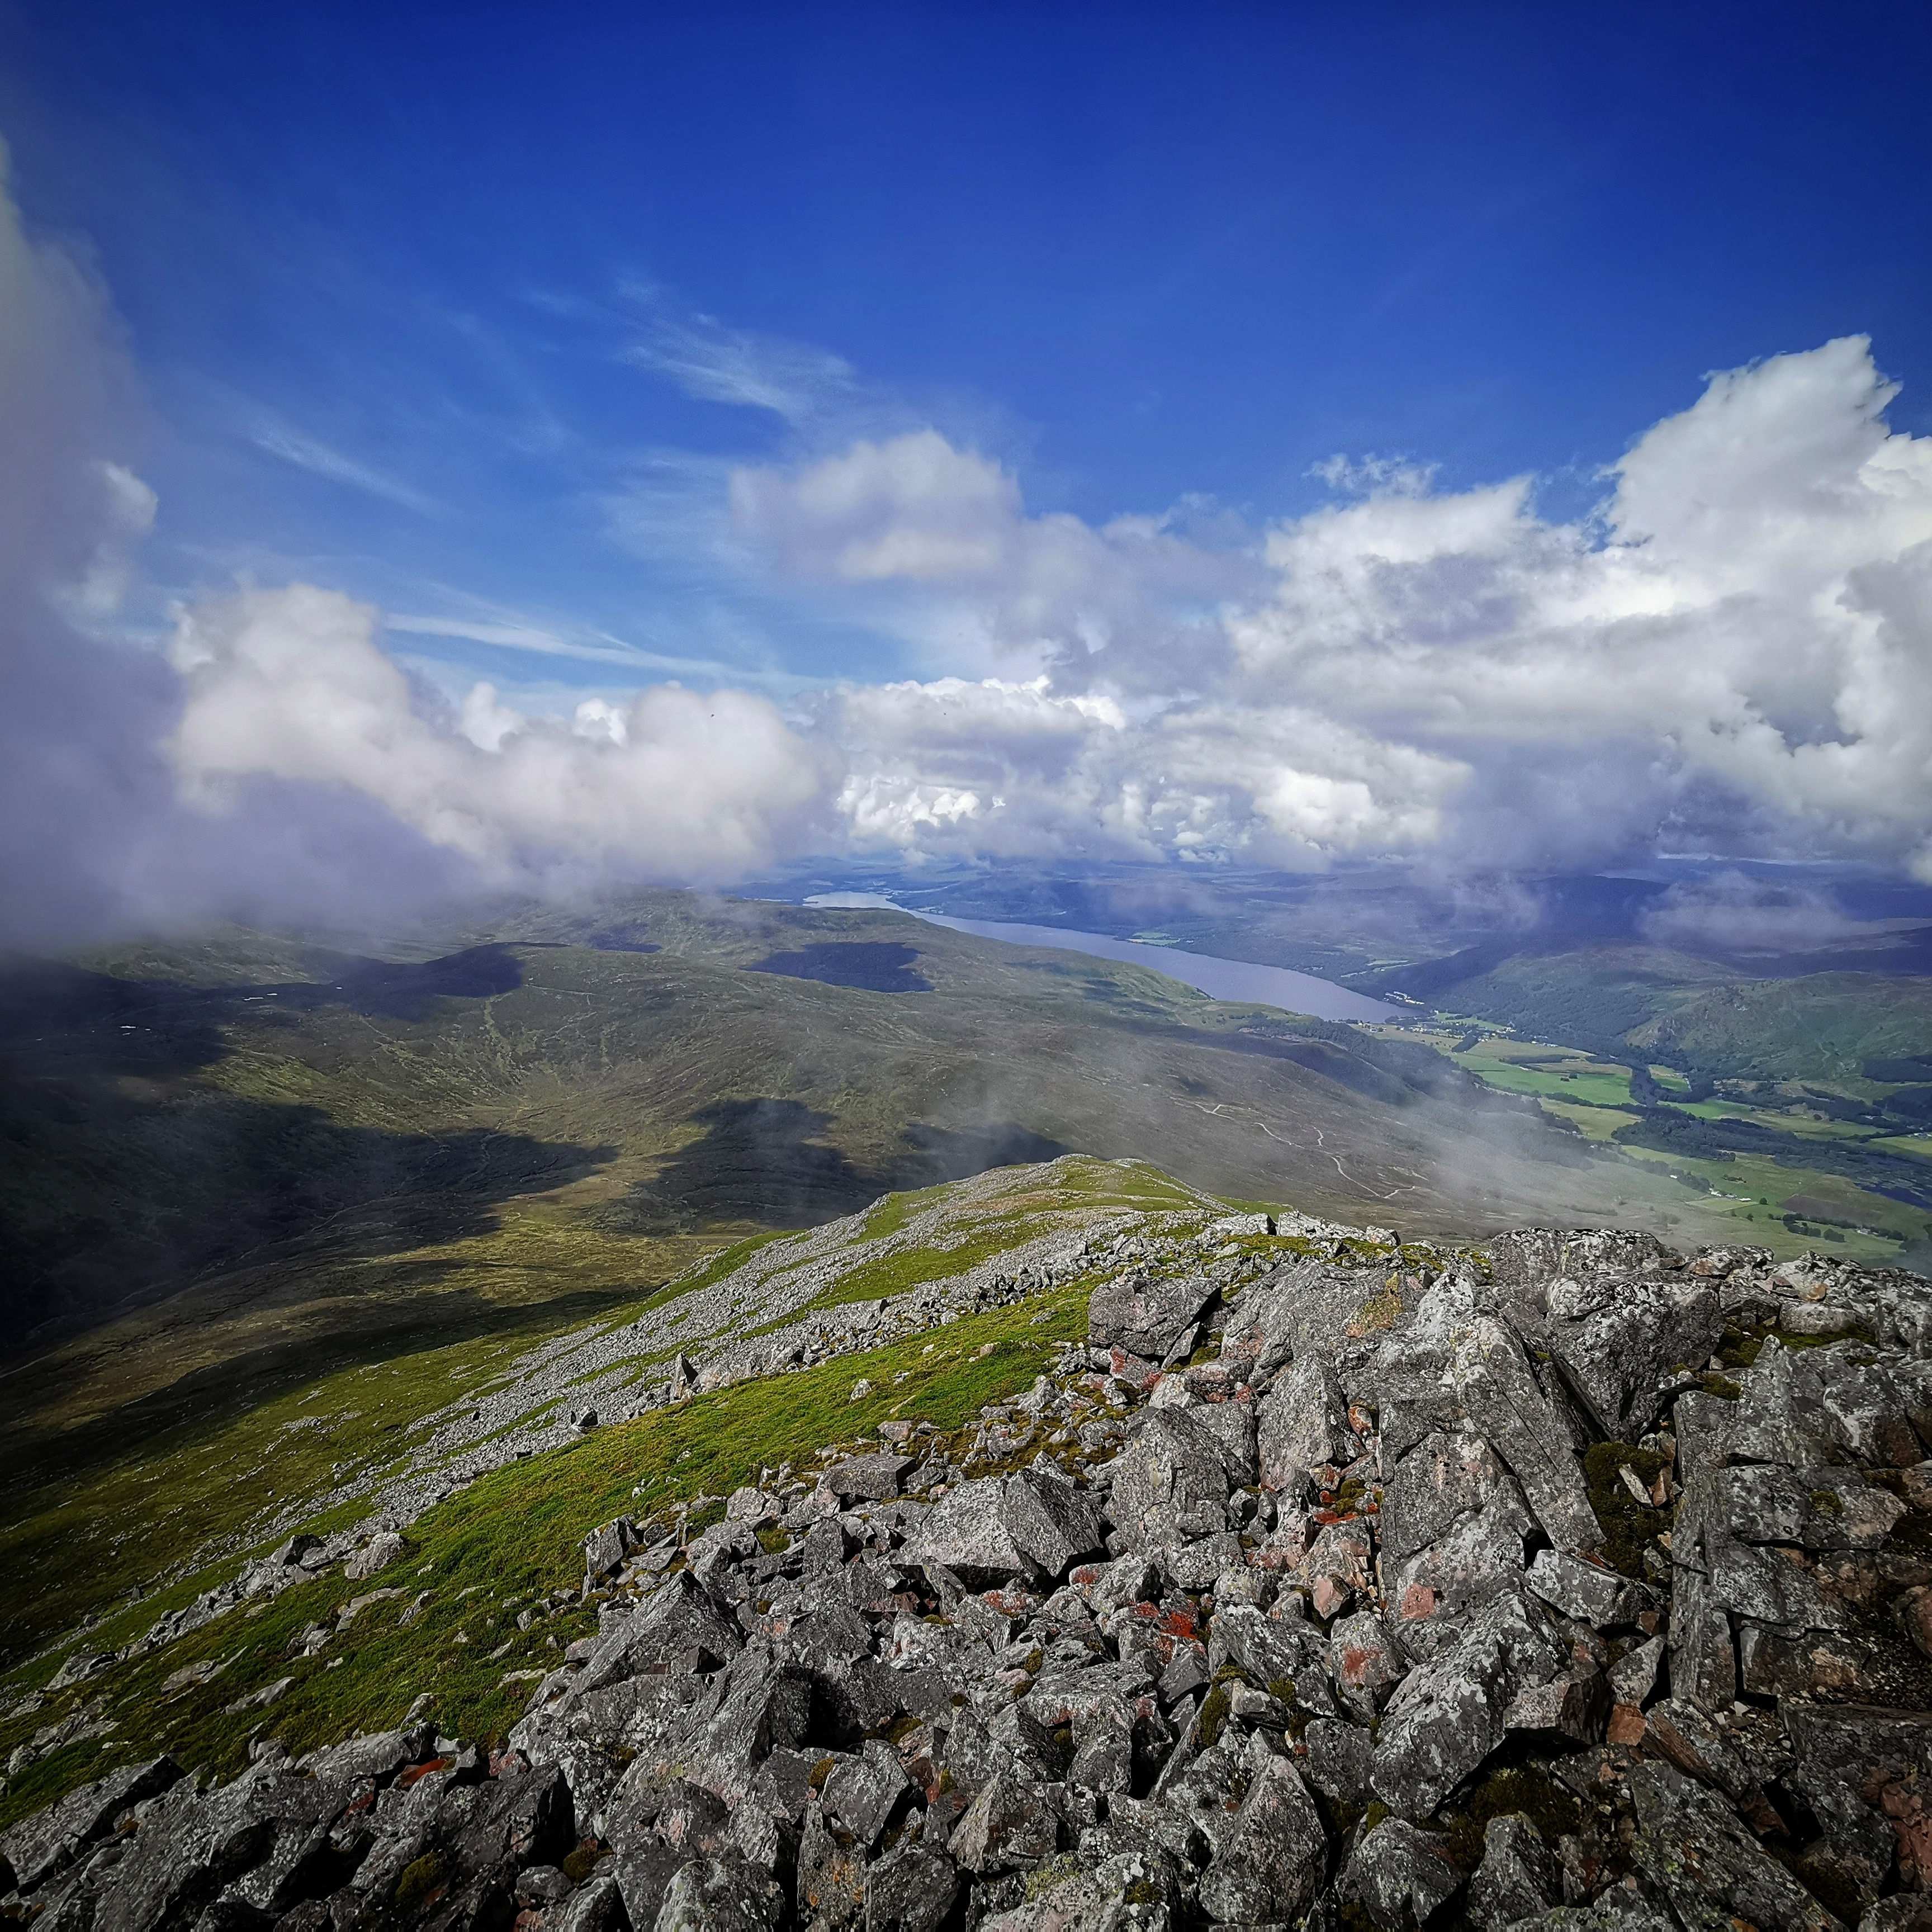 📍Schiehallion, by Kinloch Rannoch

Views of Loch Rannoch from the summit of Schiehallion. The Loch  is 15km in length, has an average width of 1.2km and reaches a depth of 130m.